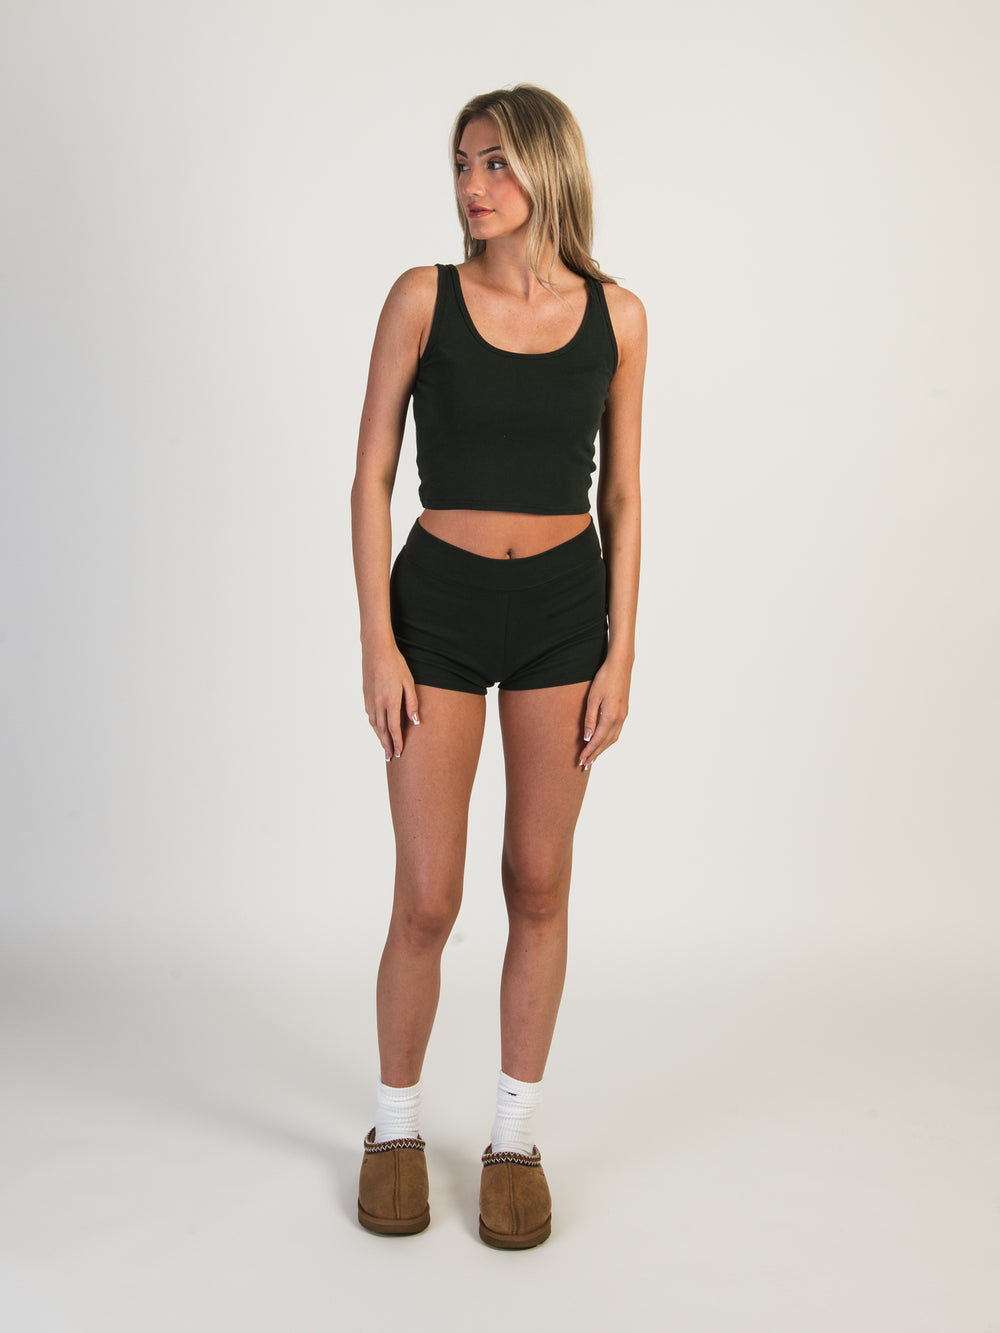 HARLOW MANDY SHORTS - FOREST